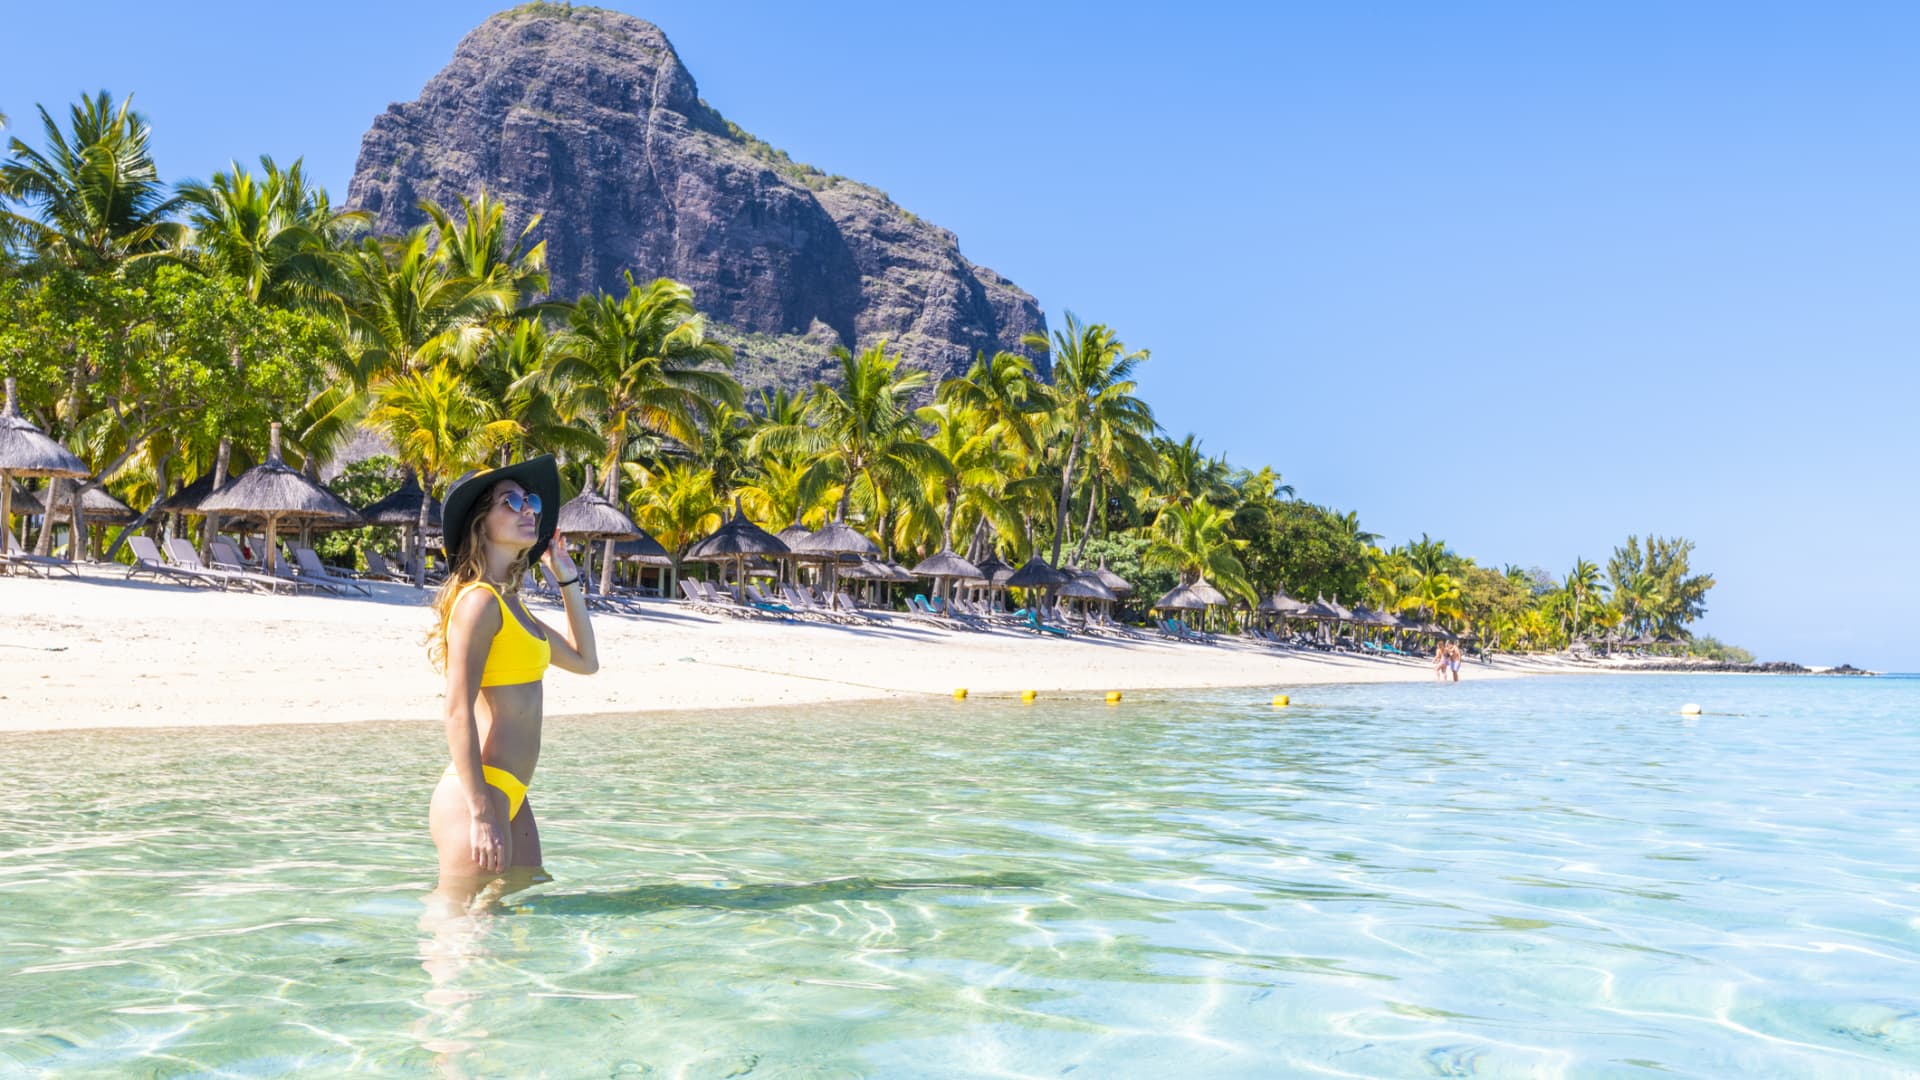 Concierge services are being planned to help digital nomads and retirees locate homes, cars, banks and telephone companies, according to Mauritius' official tourism website.